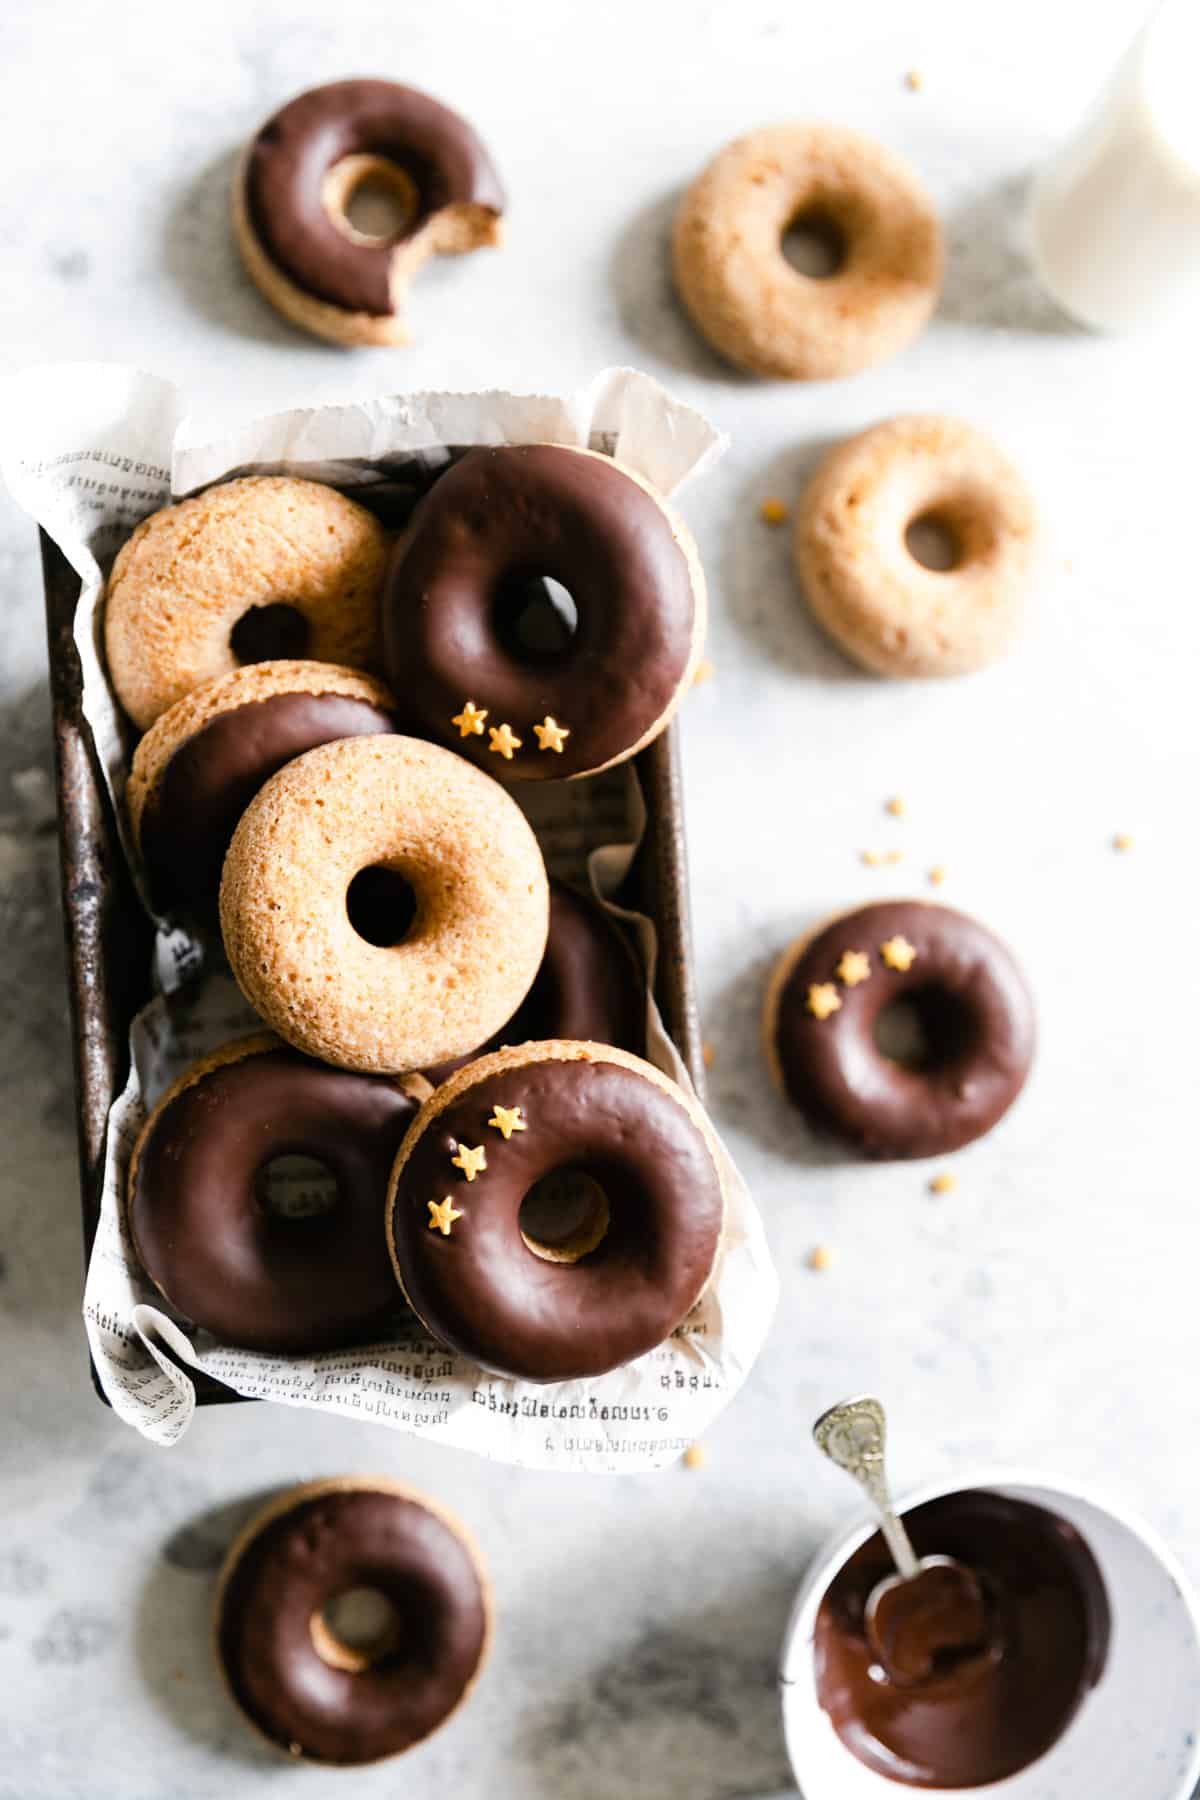 overhead shot of old baking tin filled with baked doughnuts with chocolate glaze